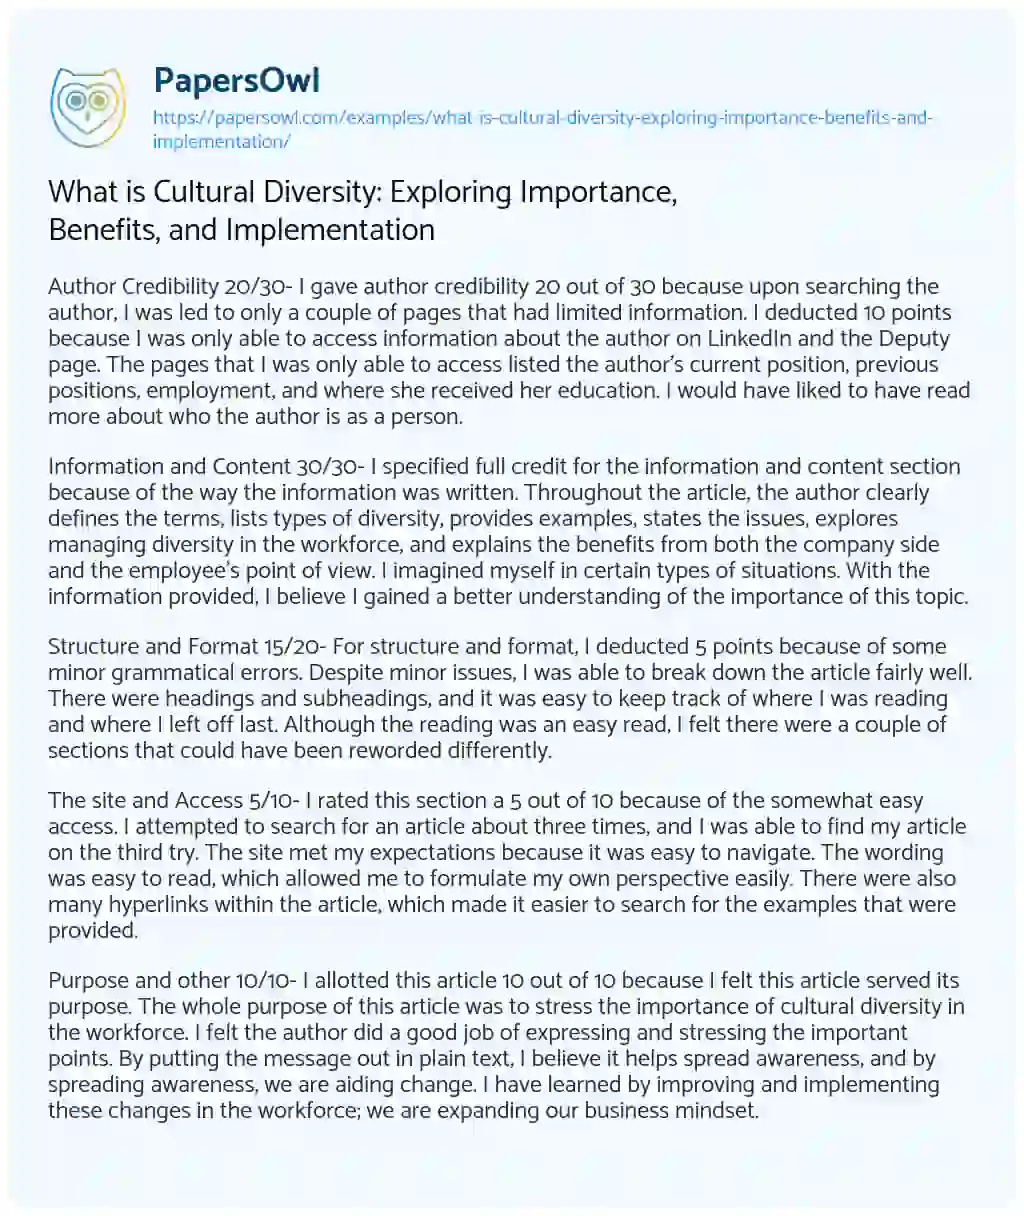 Essay on What is Cultural Diversity: Exploring Importance, Benefits, and Implementation